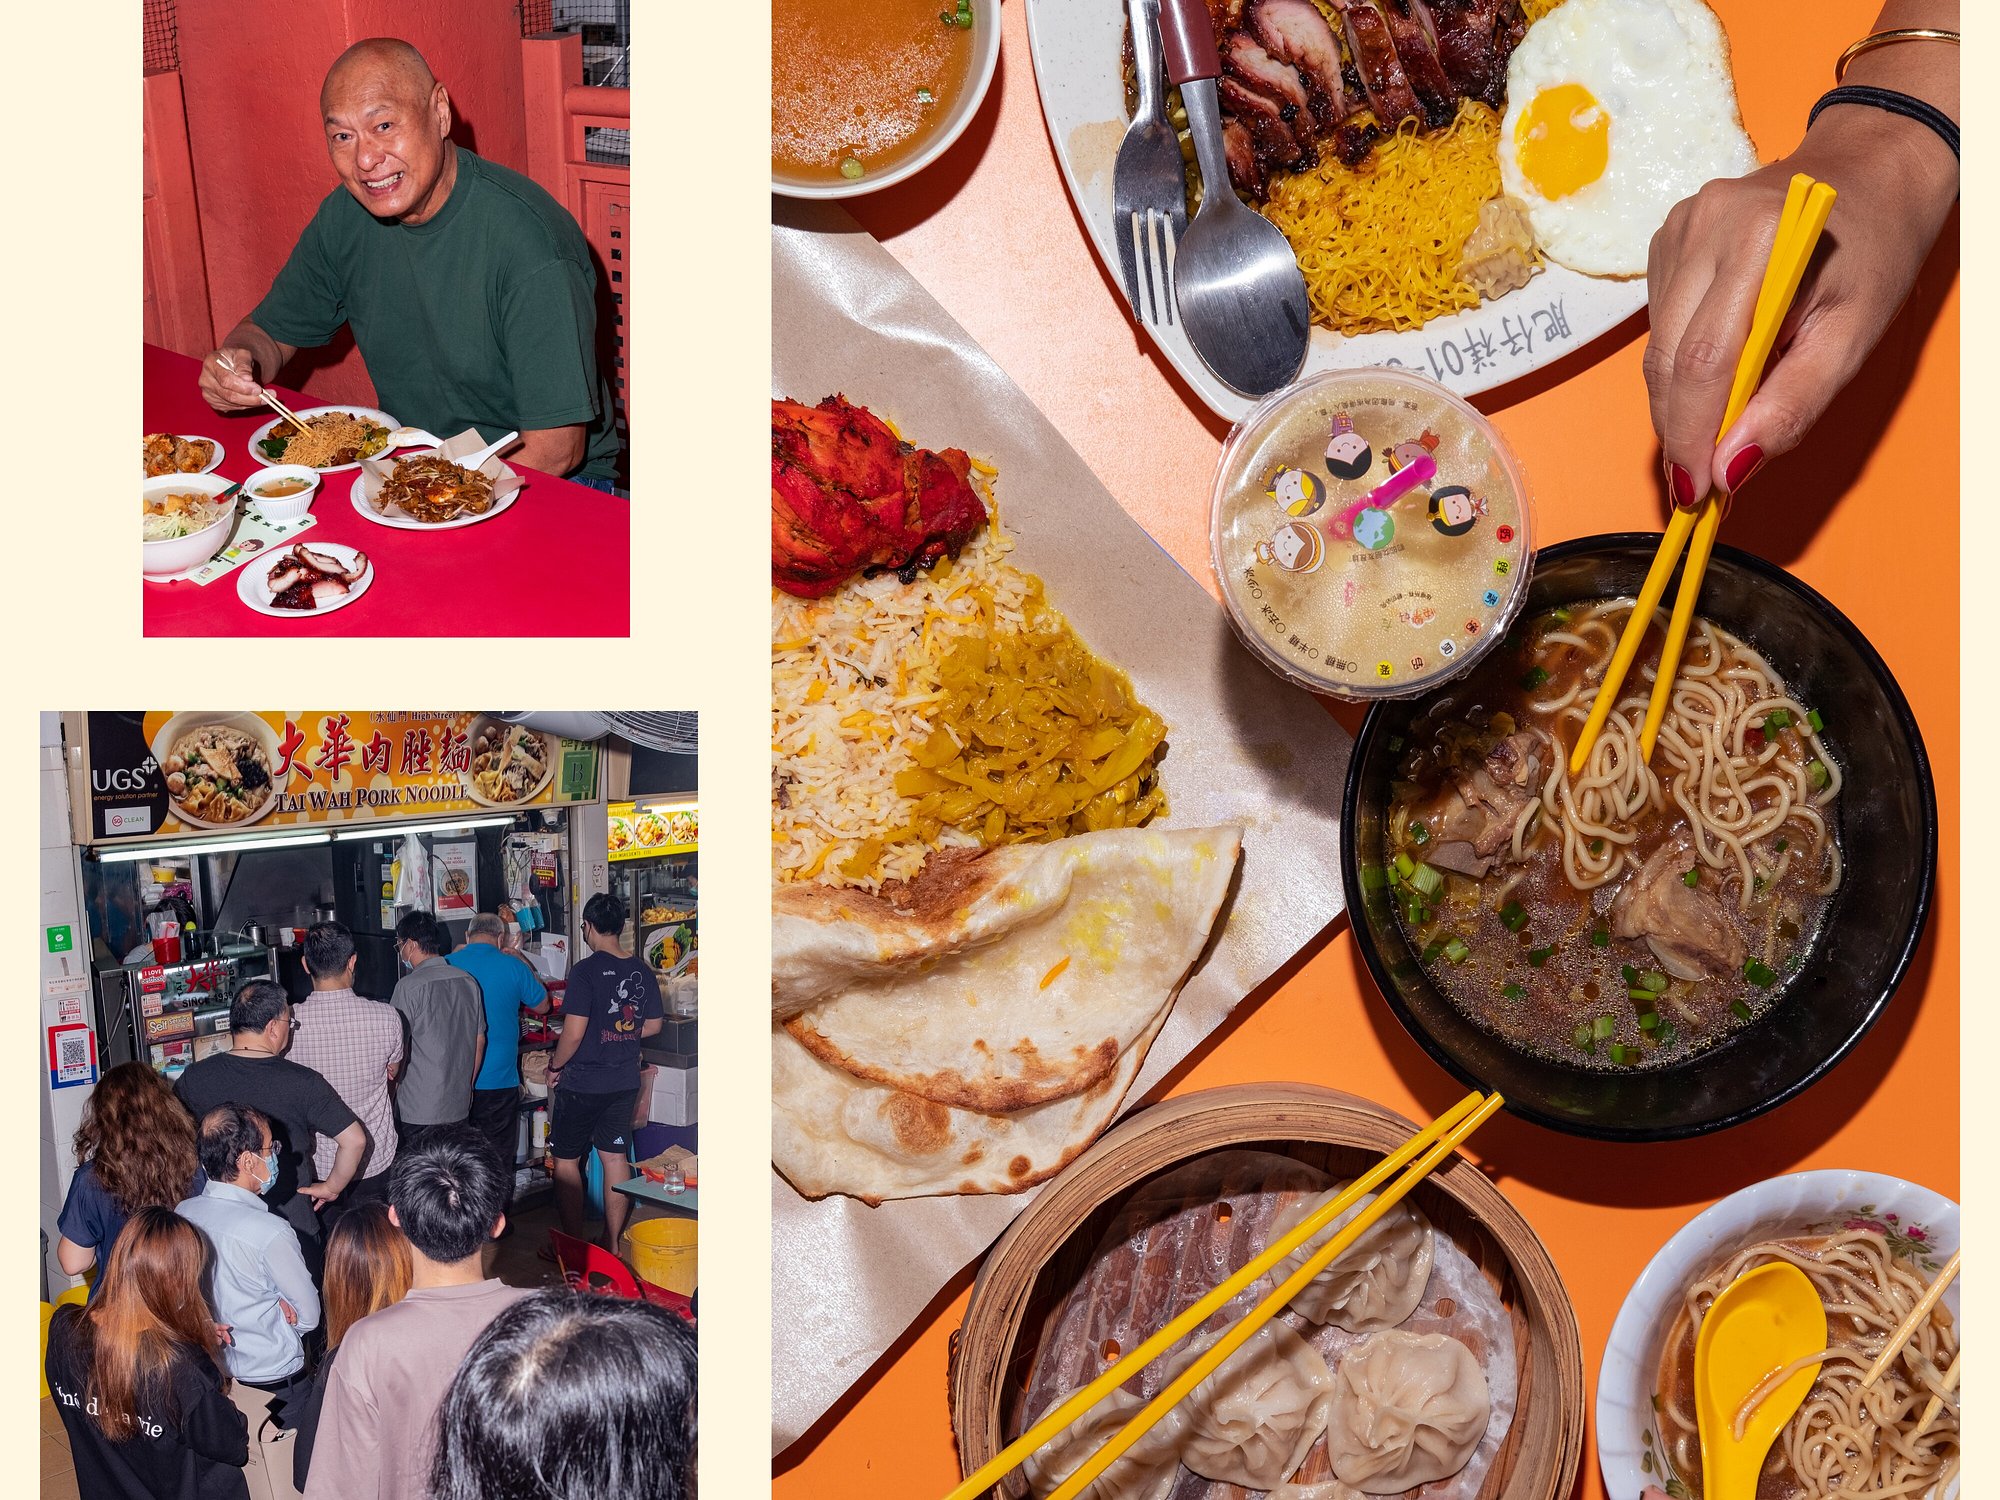 A montage of images including Damian D'Silva, MasterChef Singapore judge and founder of Rempapa, sampling of dishes at ABC Brickworks, a plate of char kway teow, and queues for Tai Wah Pork Noodles